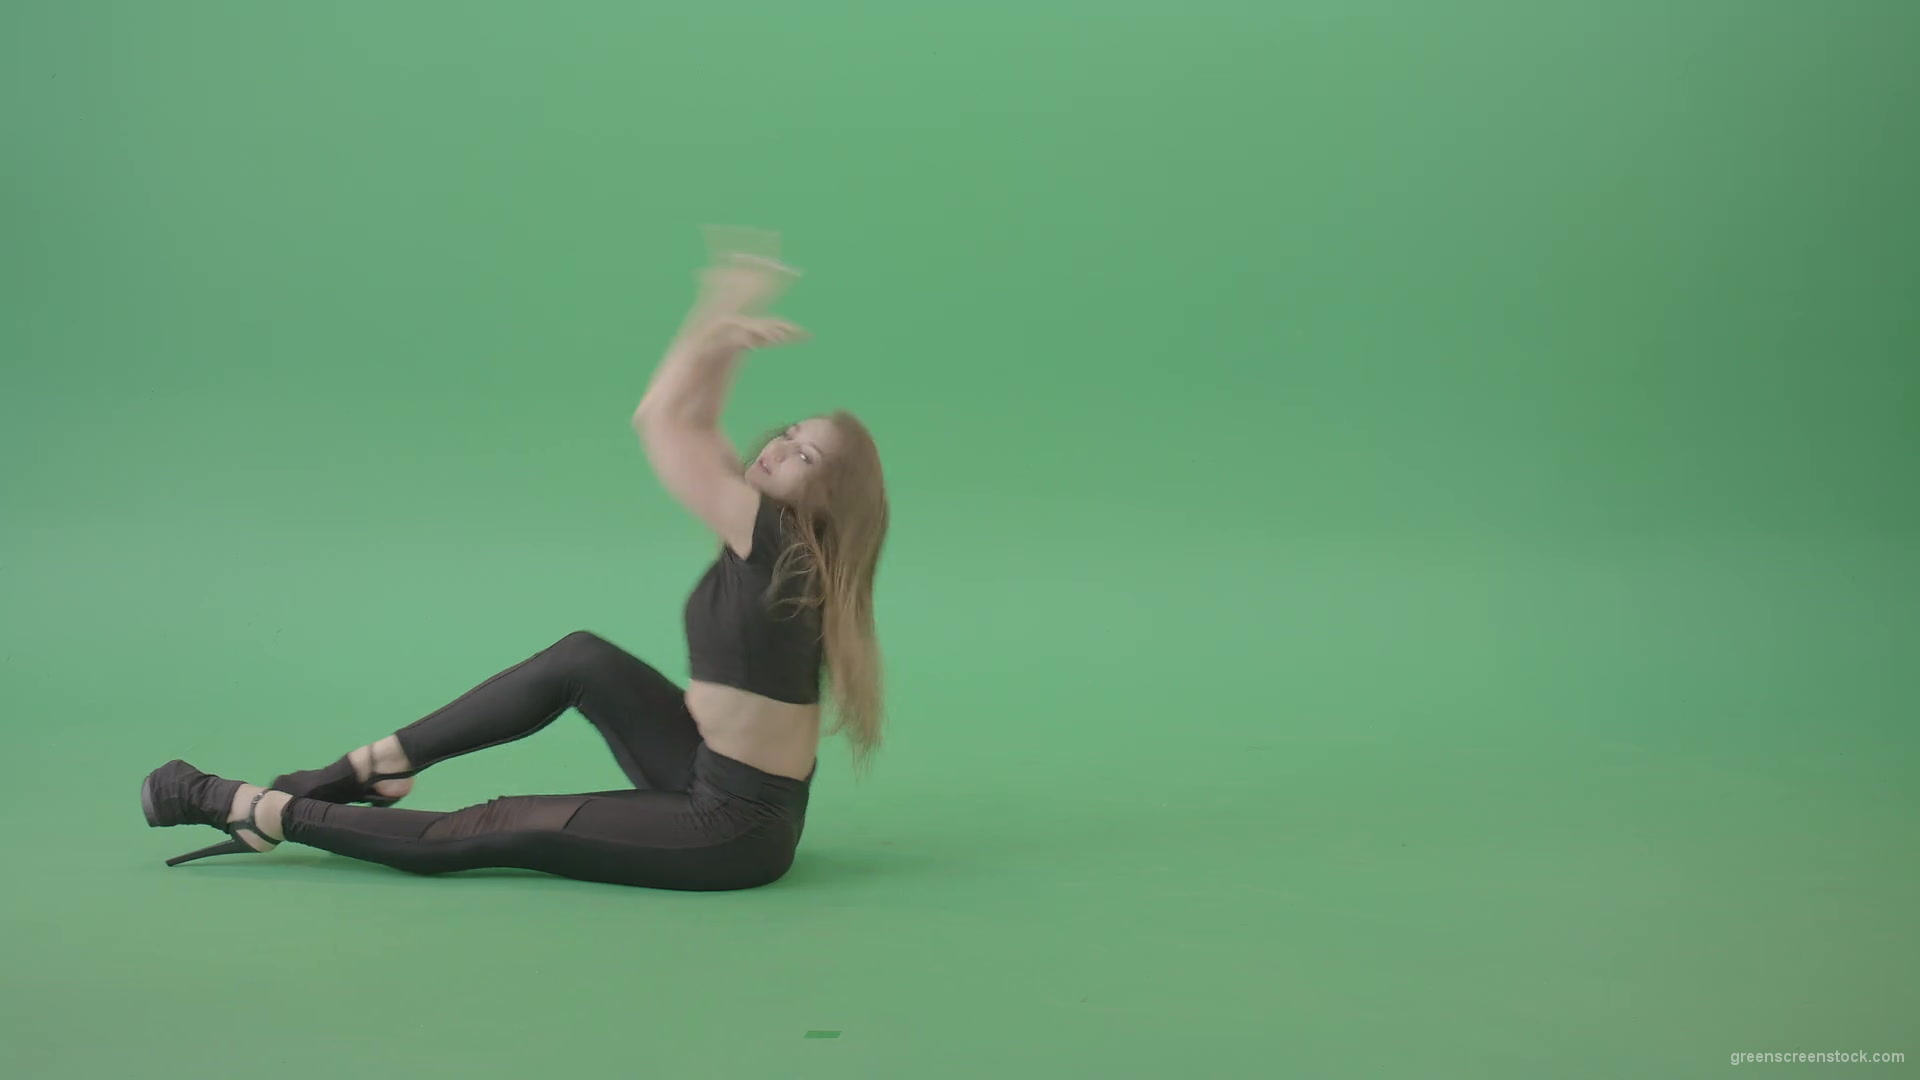 Sexy-Dancing-Girl-showing-Exotic-erotic-dance-isolated-on-green-screen-4K-Video-Footage-1920_005 Green Screen Stock